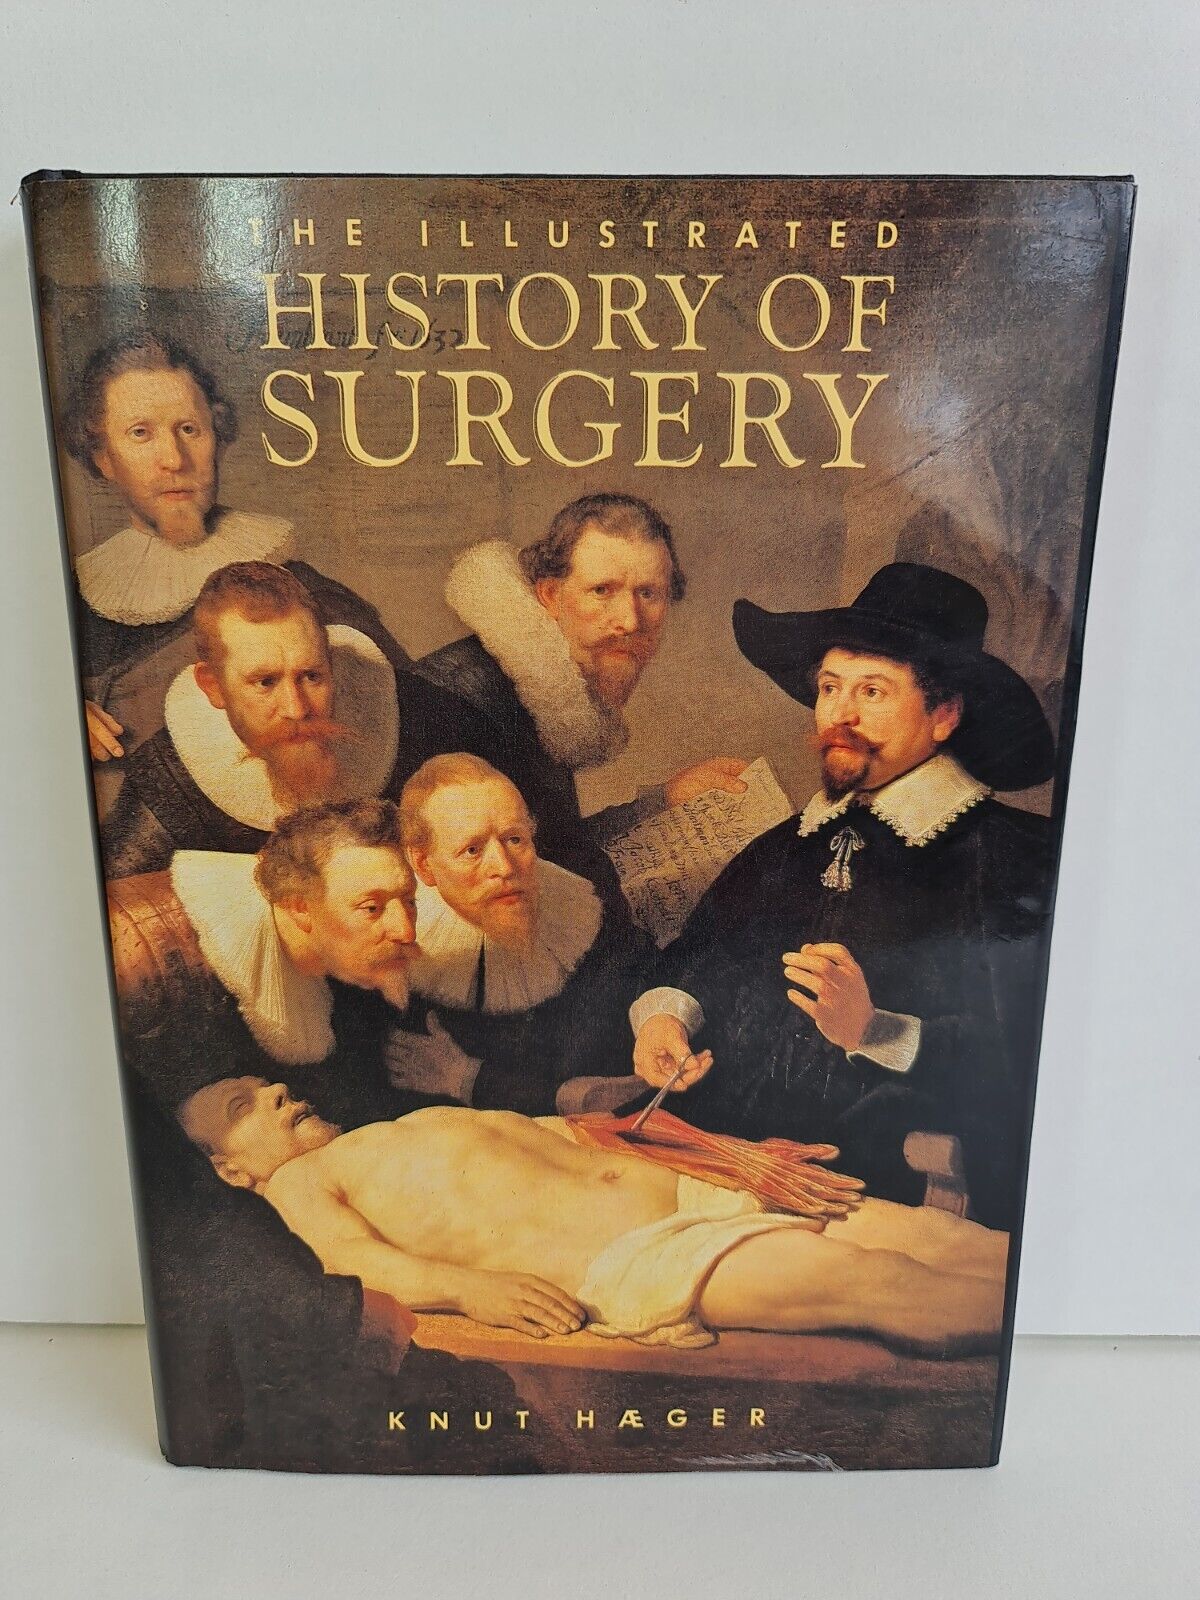 Illustrated History Of Surgery by Knut Haeger